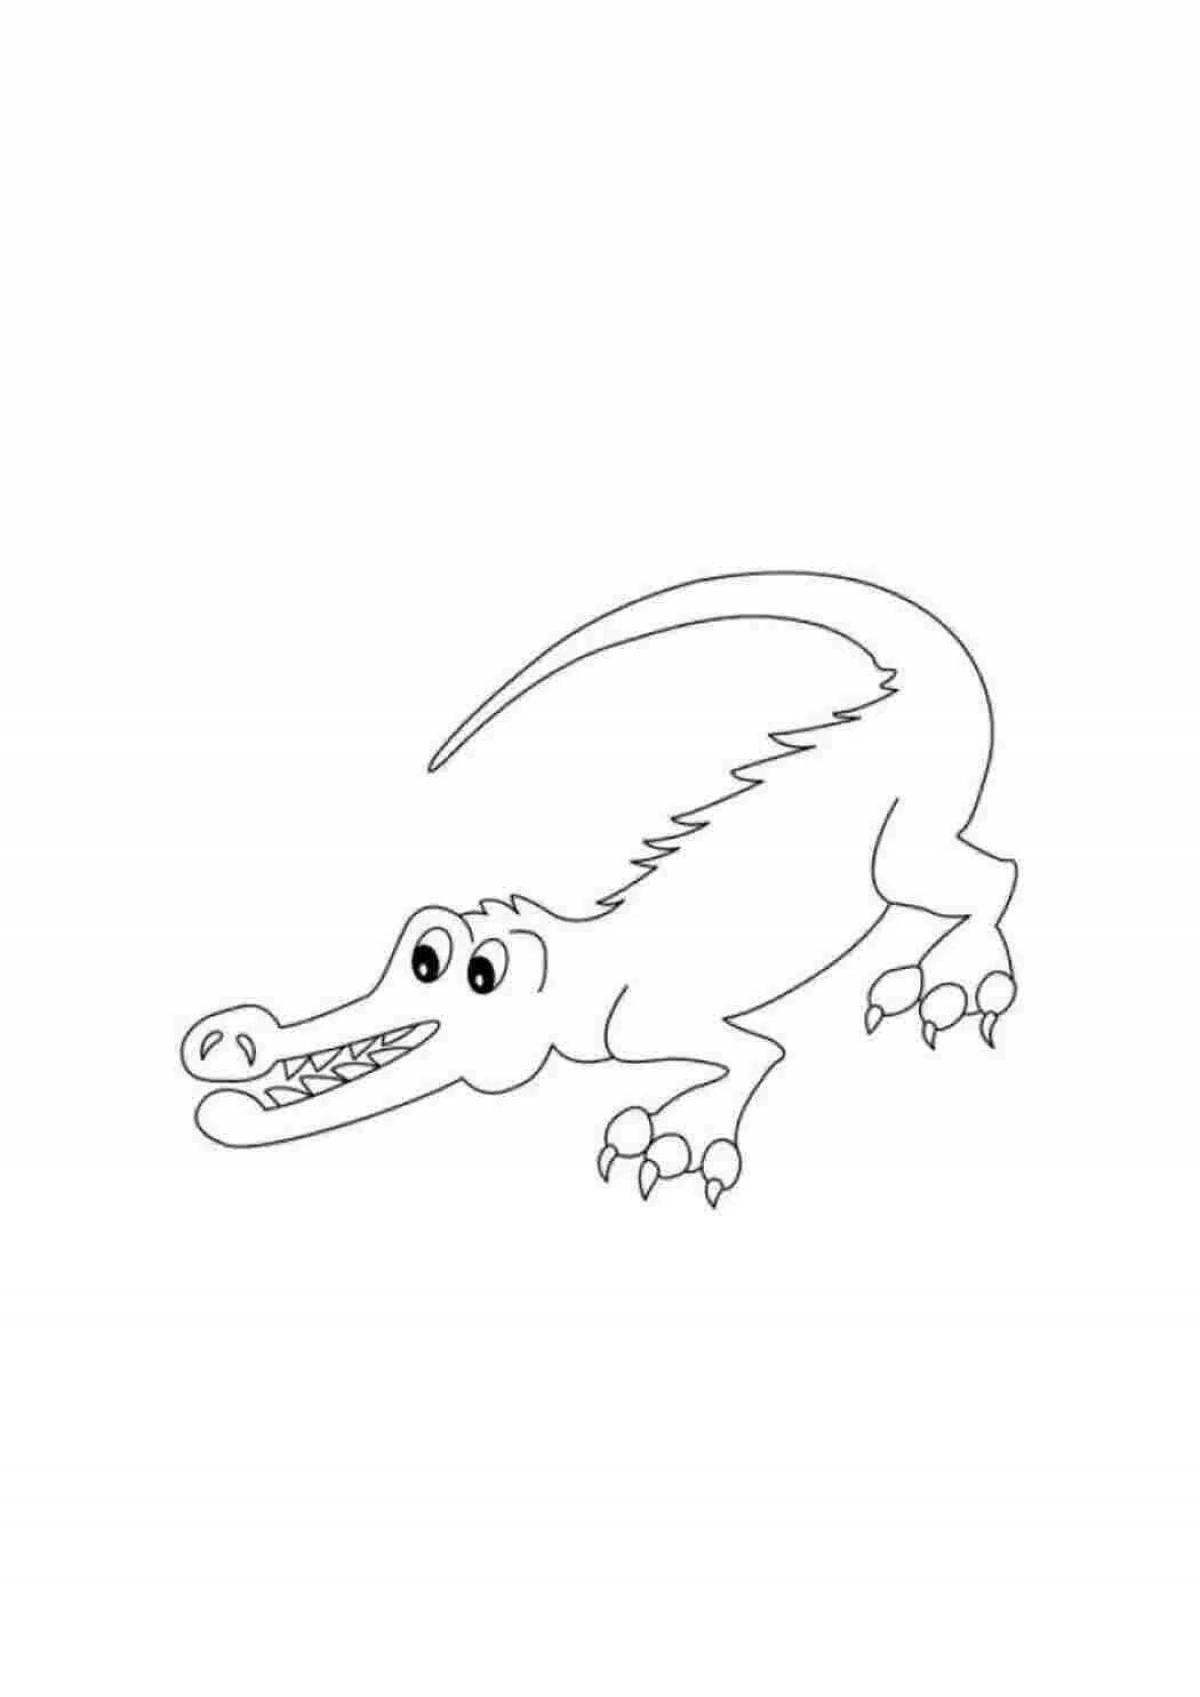 Exciting coloring crocodile antistress